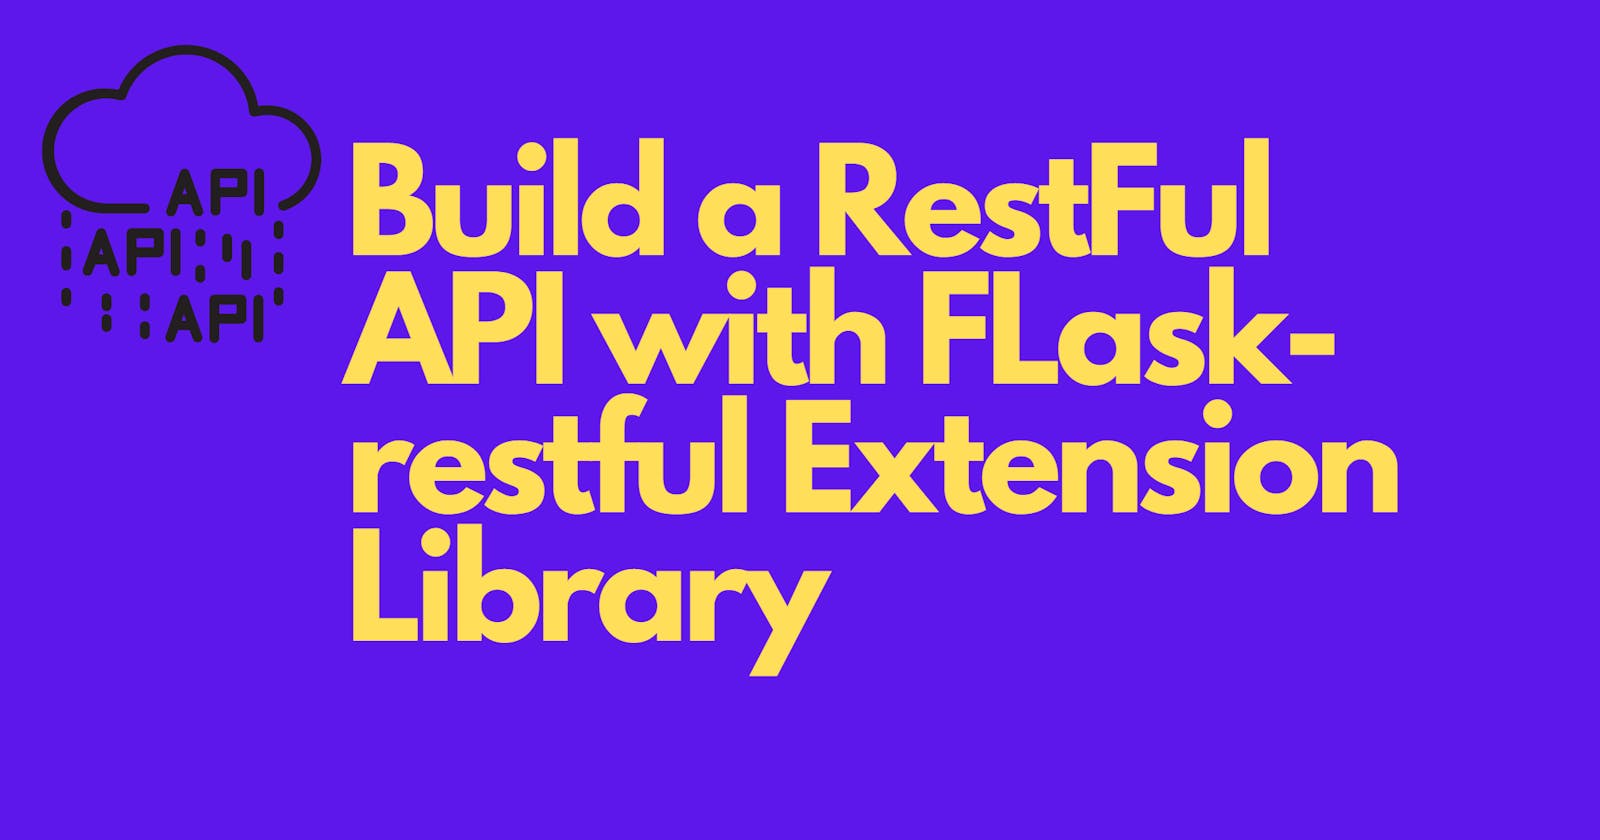 Build a basic RESTful API with Flask-RESTful extension library.